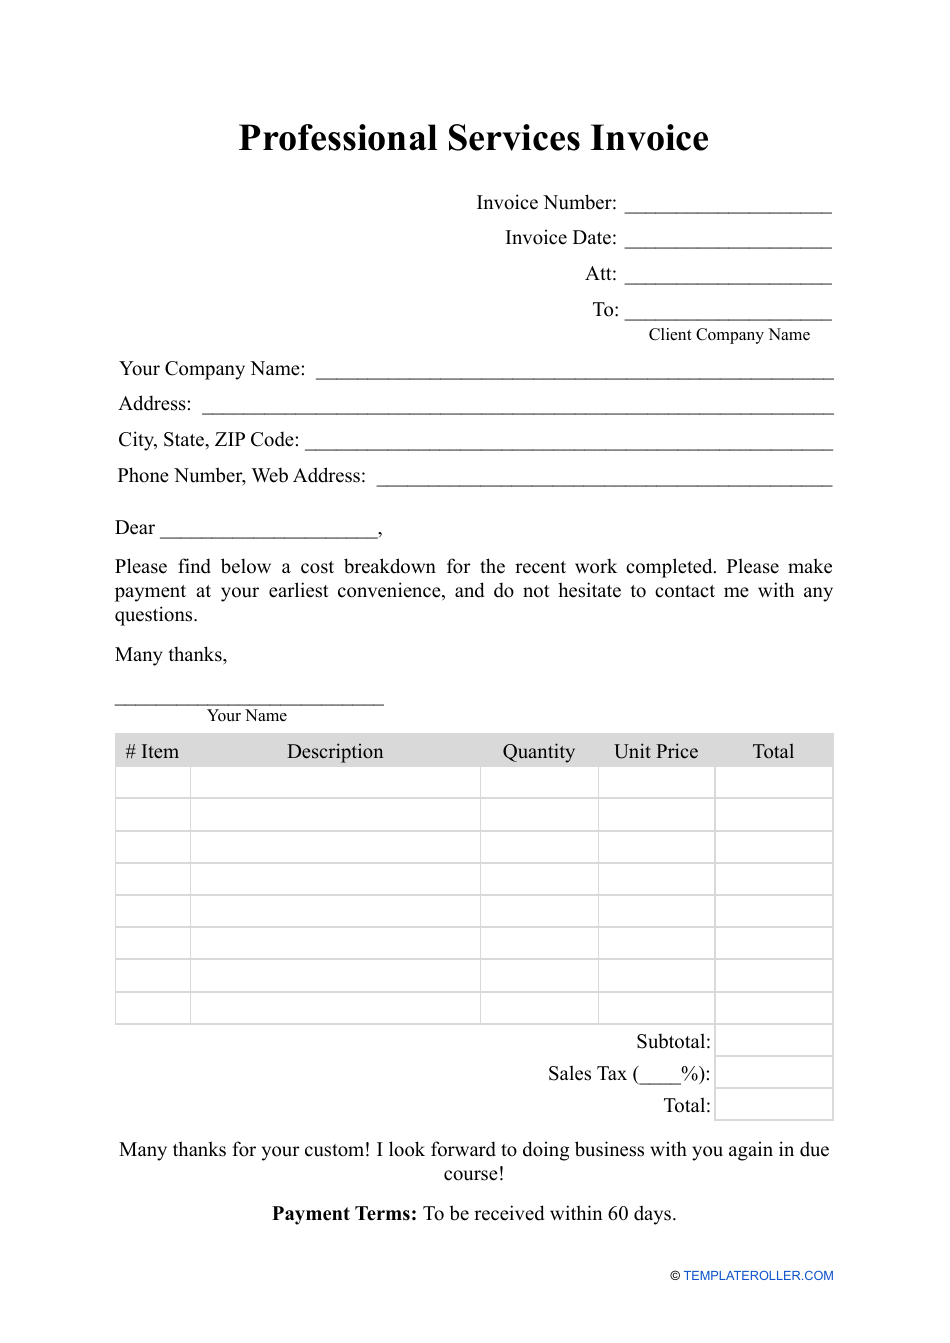 invoice for professional services template